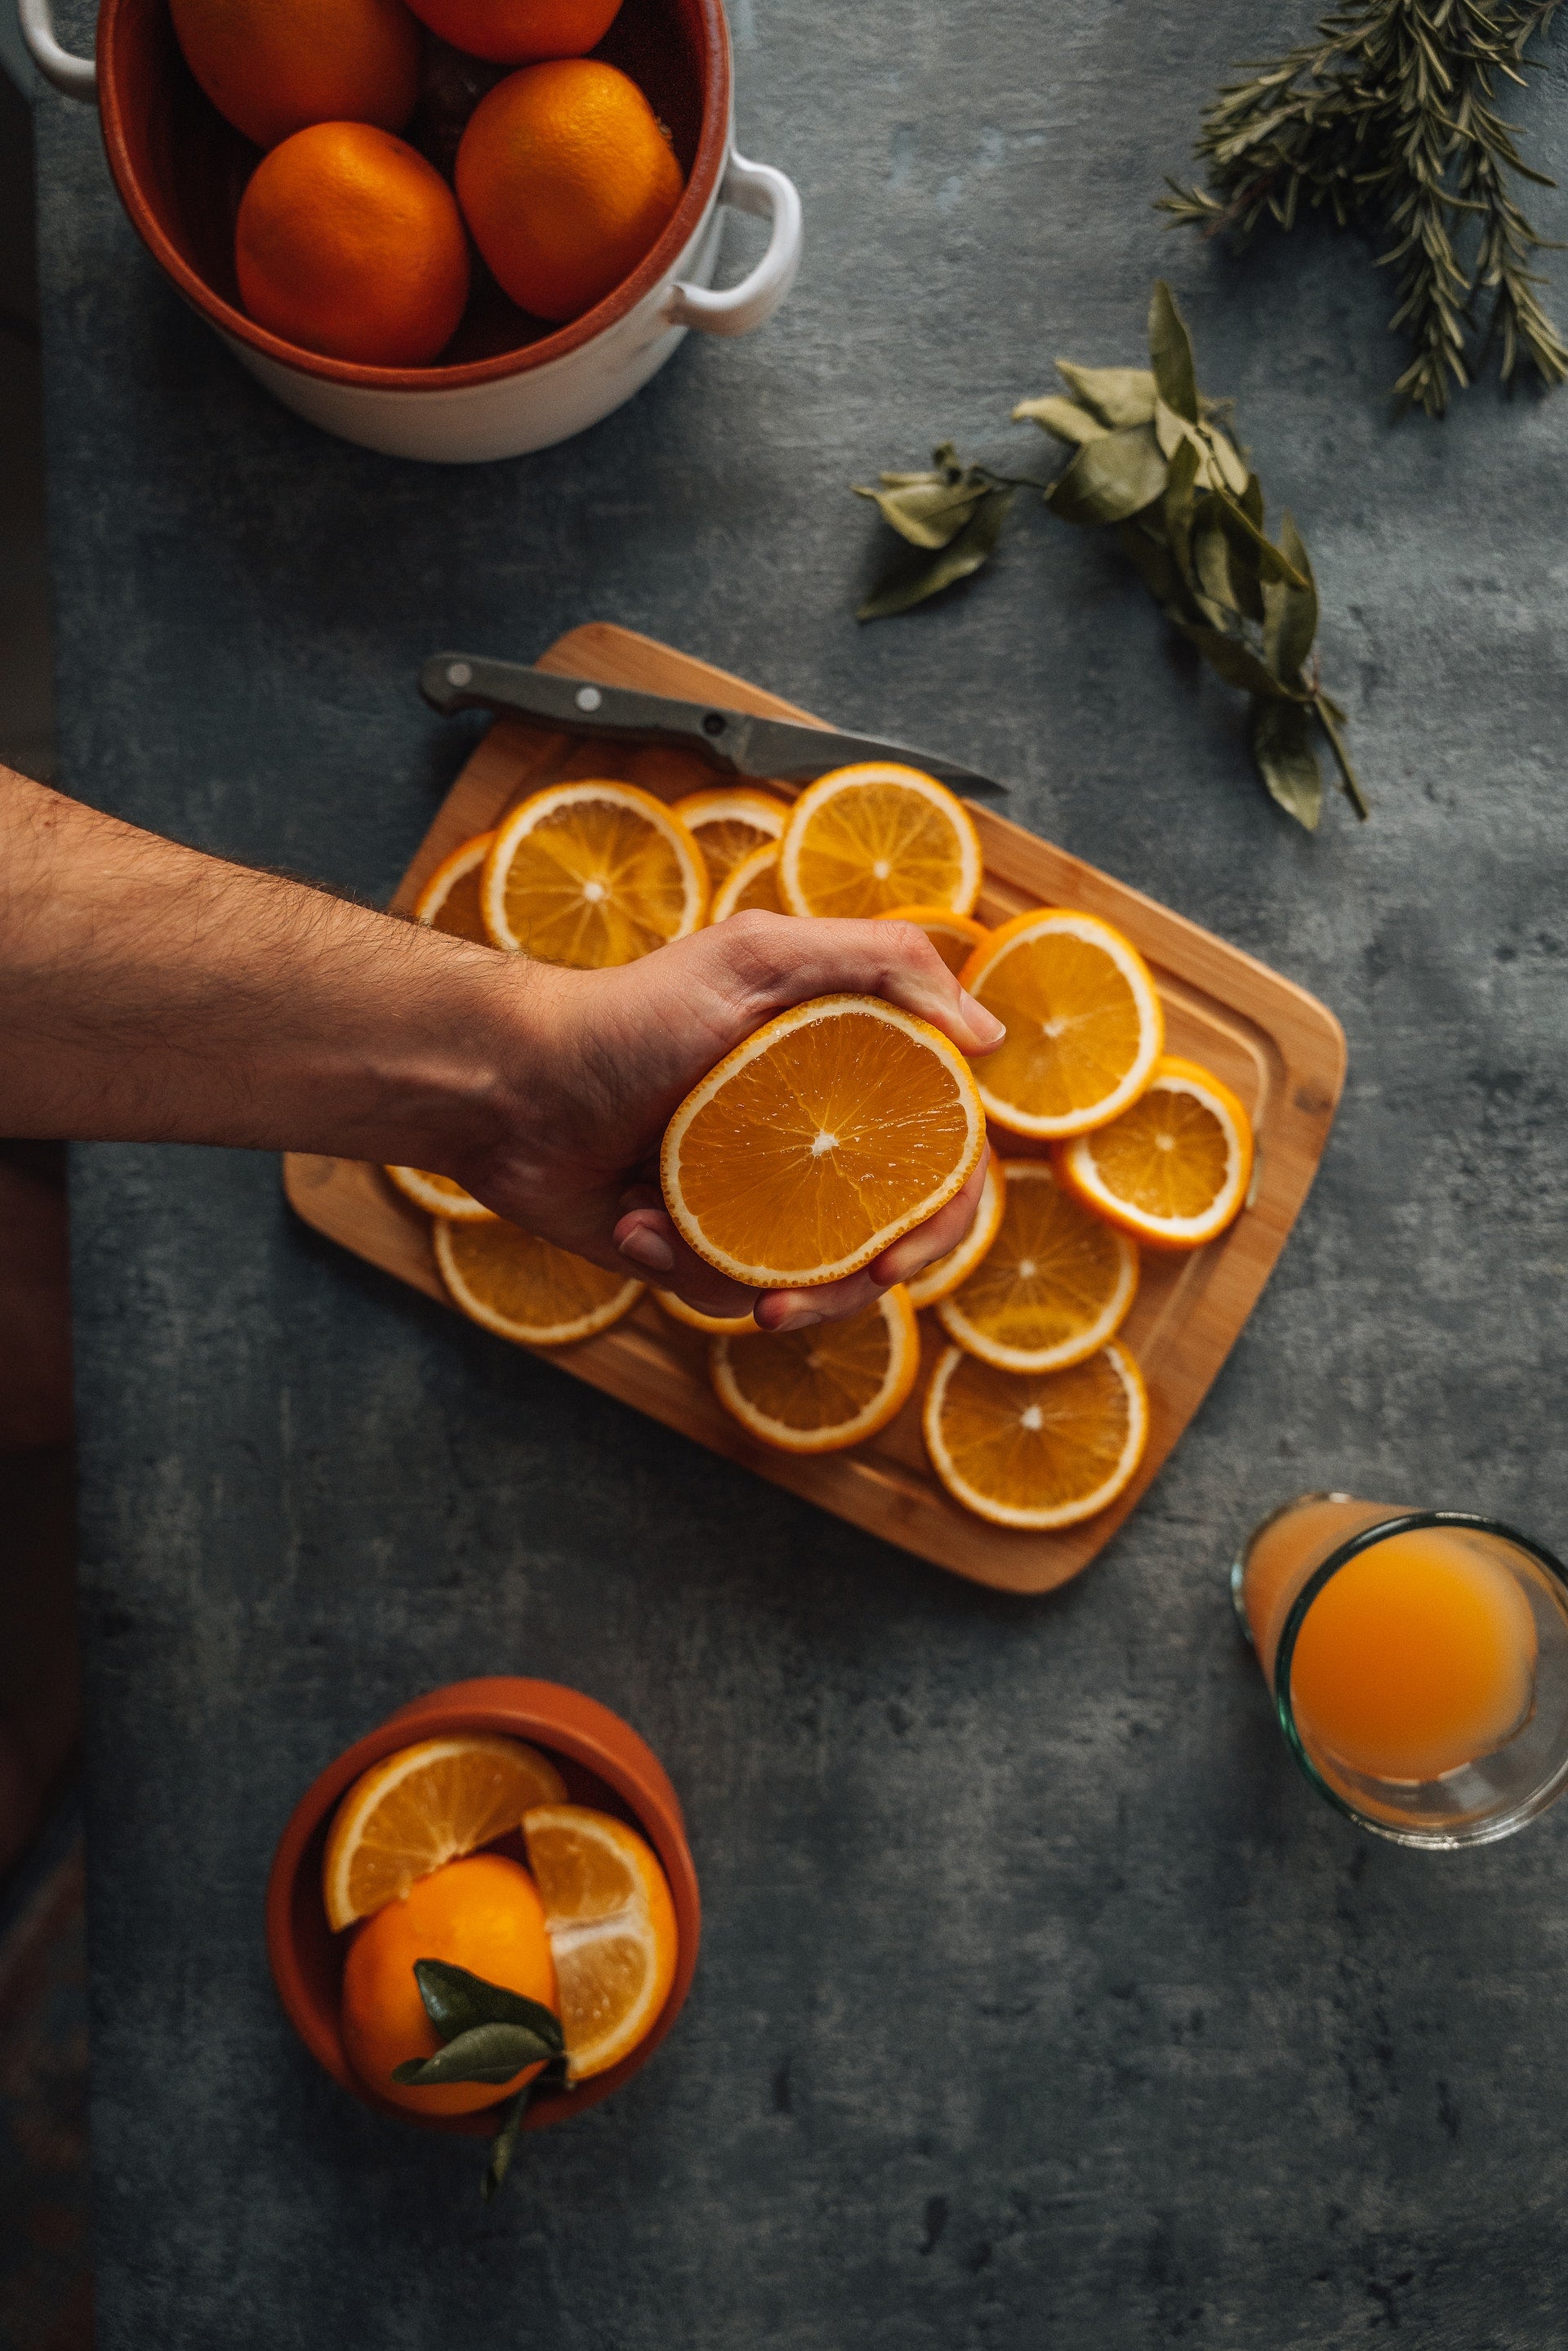 An overhead picture of a person's hand squeezing a orange above sliced oranges on a cutting board.